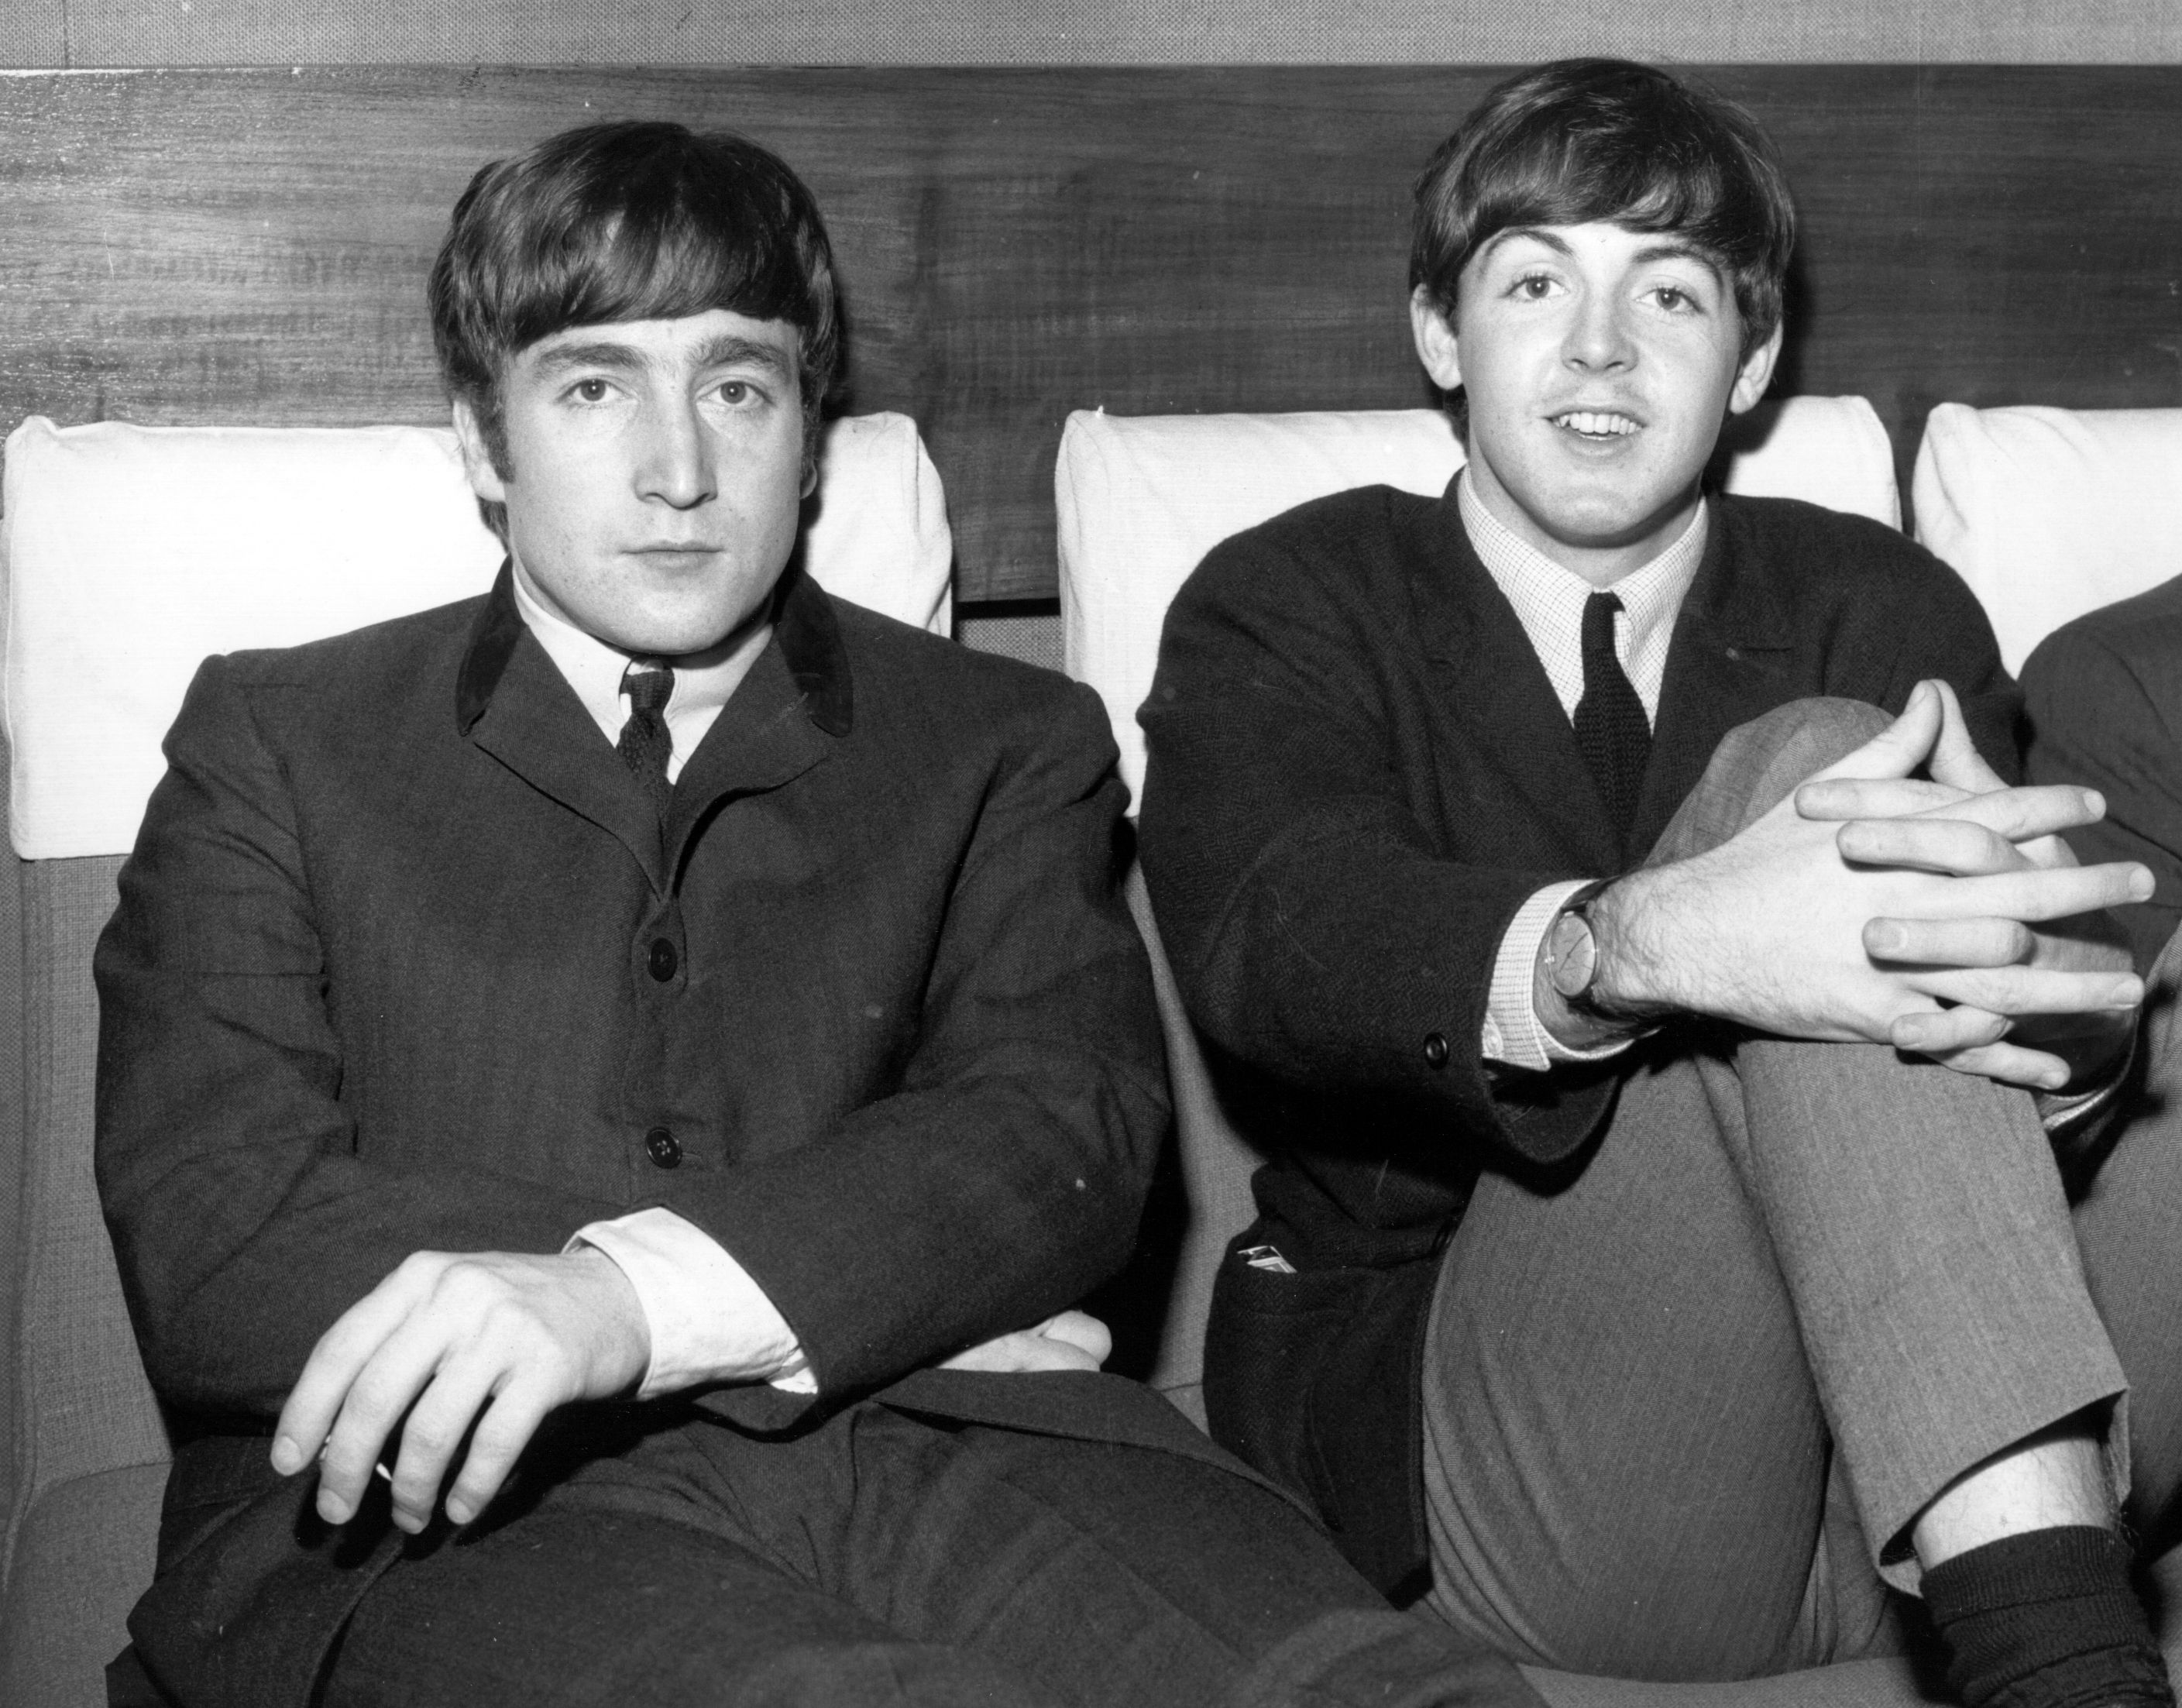 Two members of The Beatles, John Lennon, singer and guitarist, and Paul McCartney, singer and bass guitarist